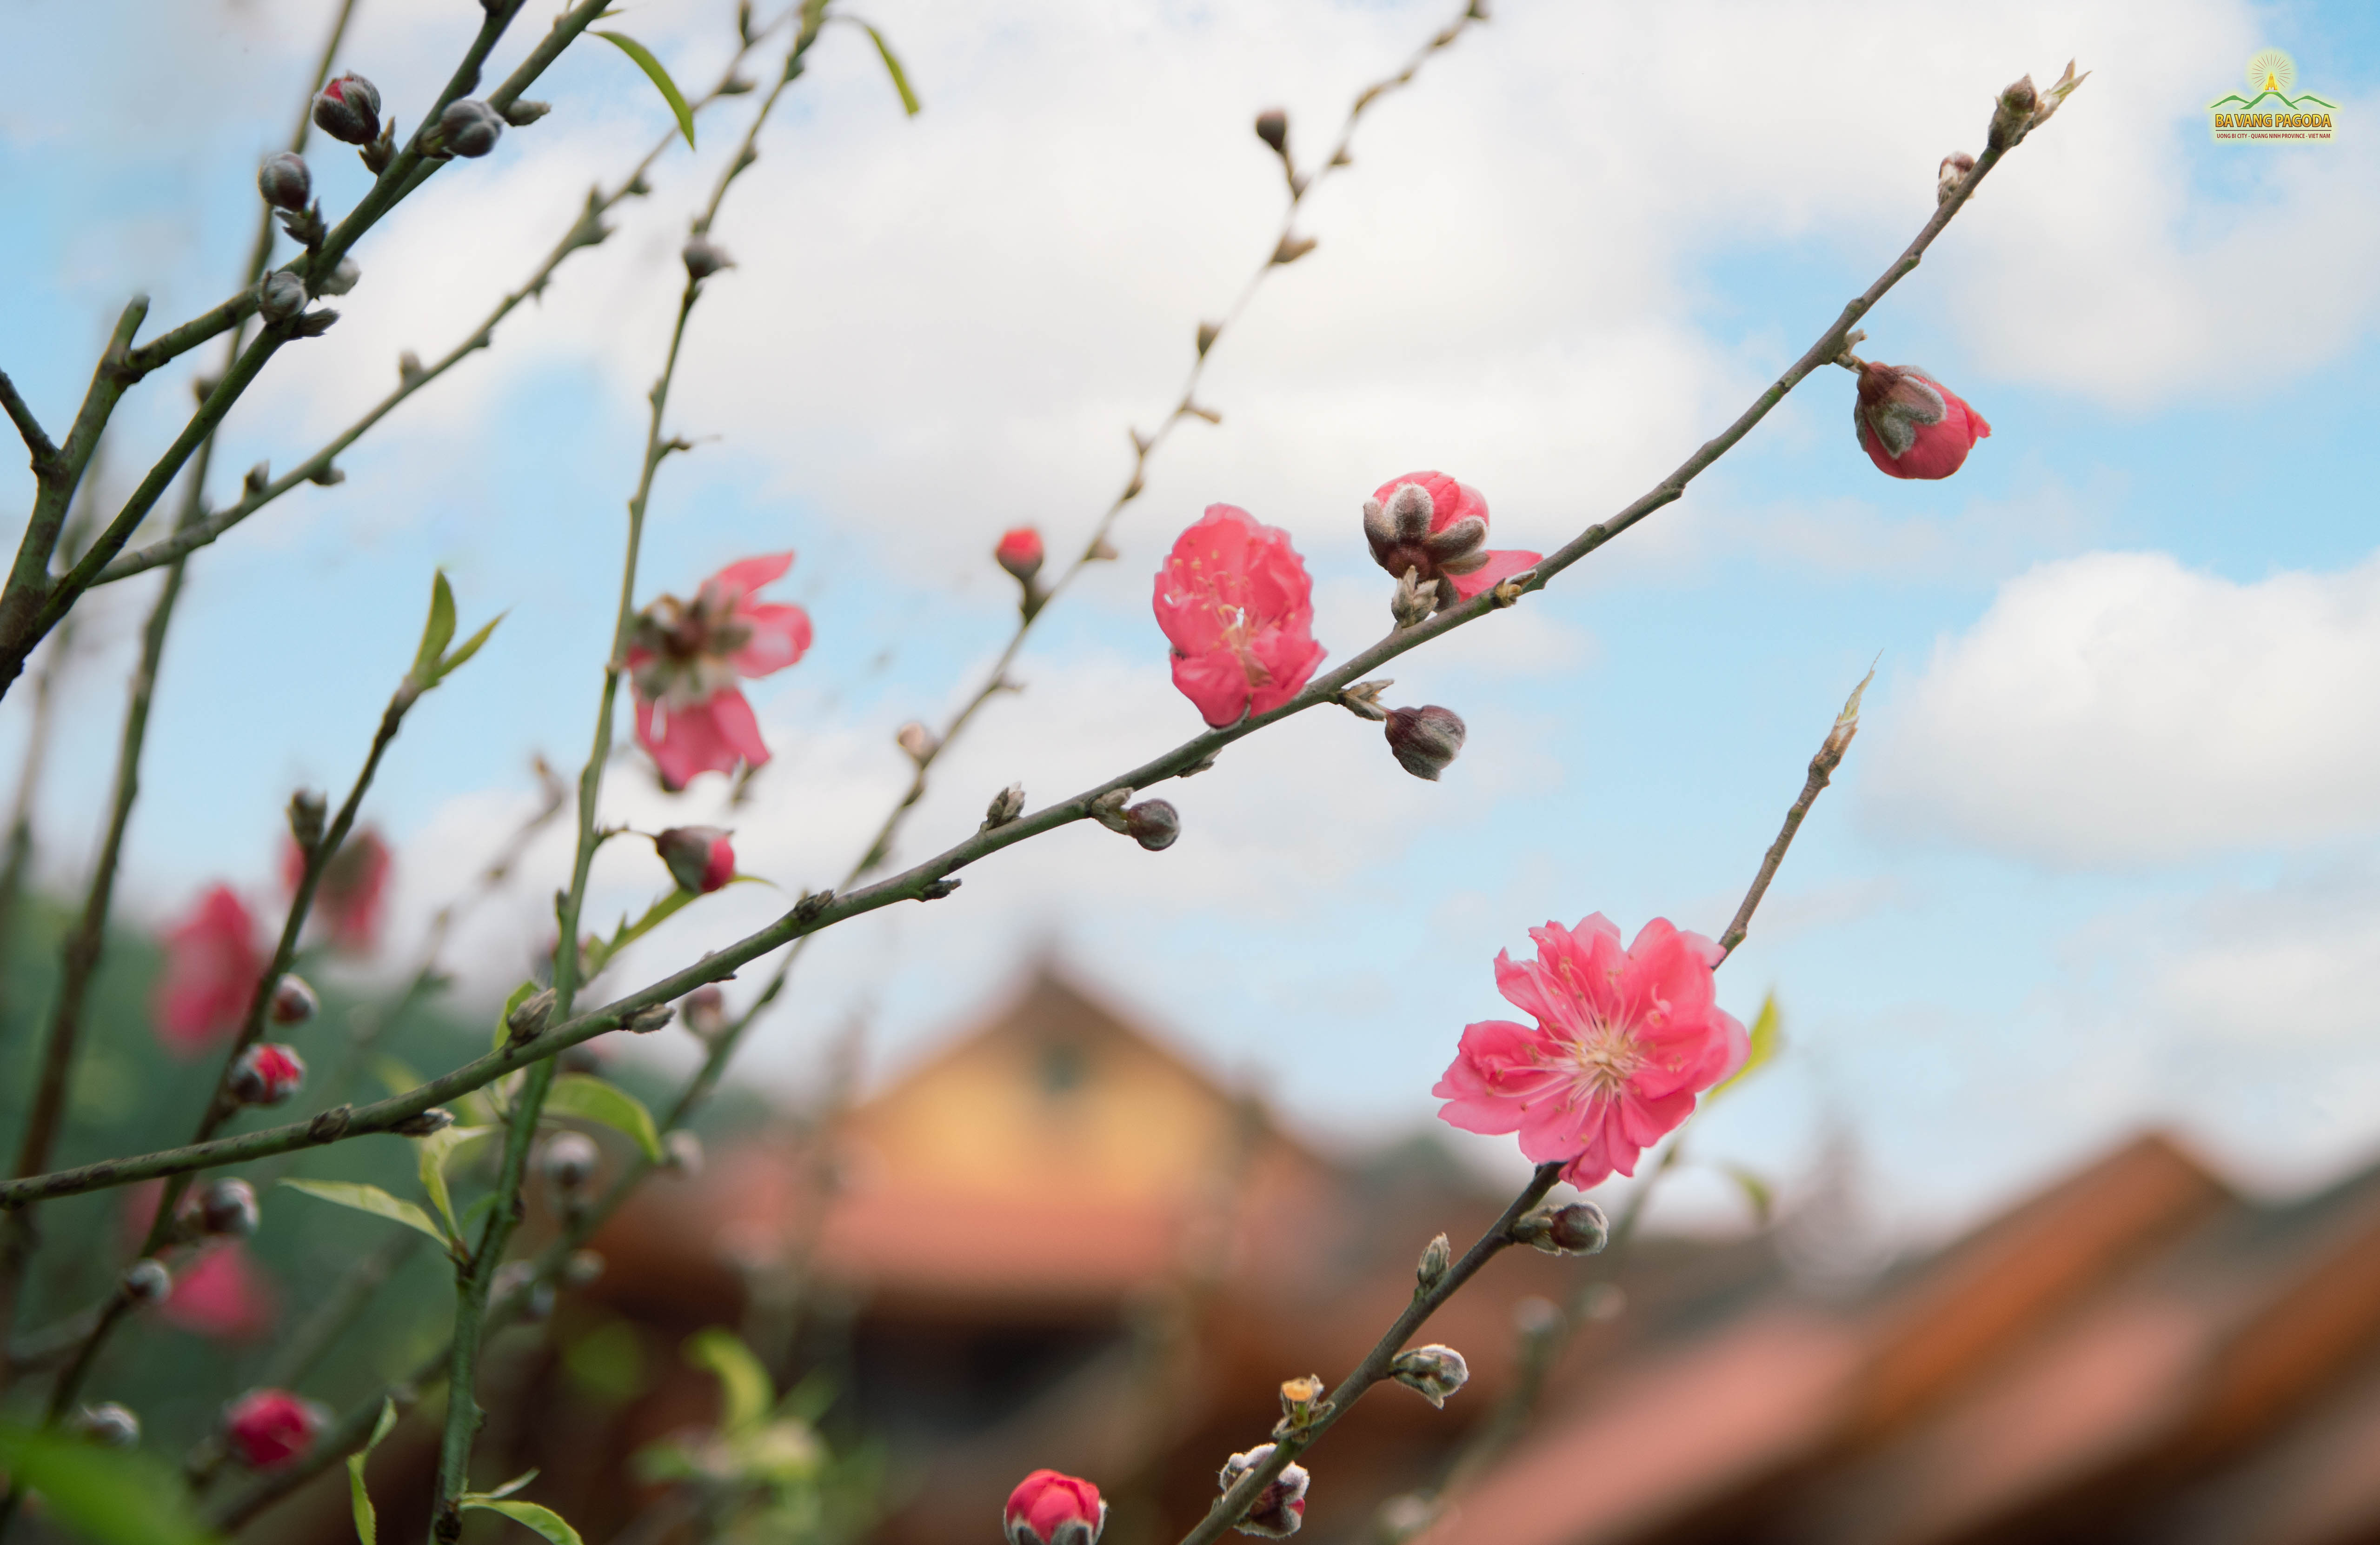 As spring approaches, we wish you a peaceful Tet holiday and the strength to overcome all challenges, just like the resilient peach tree.